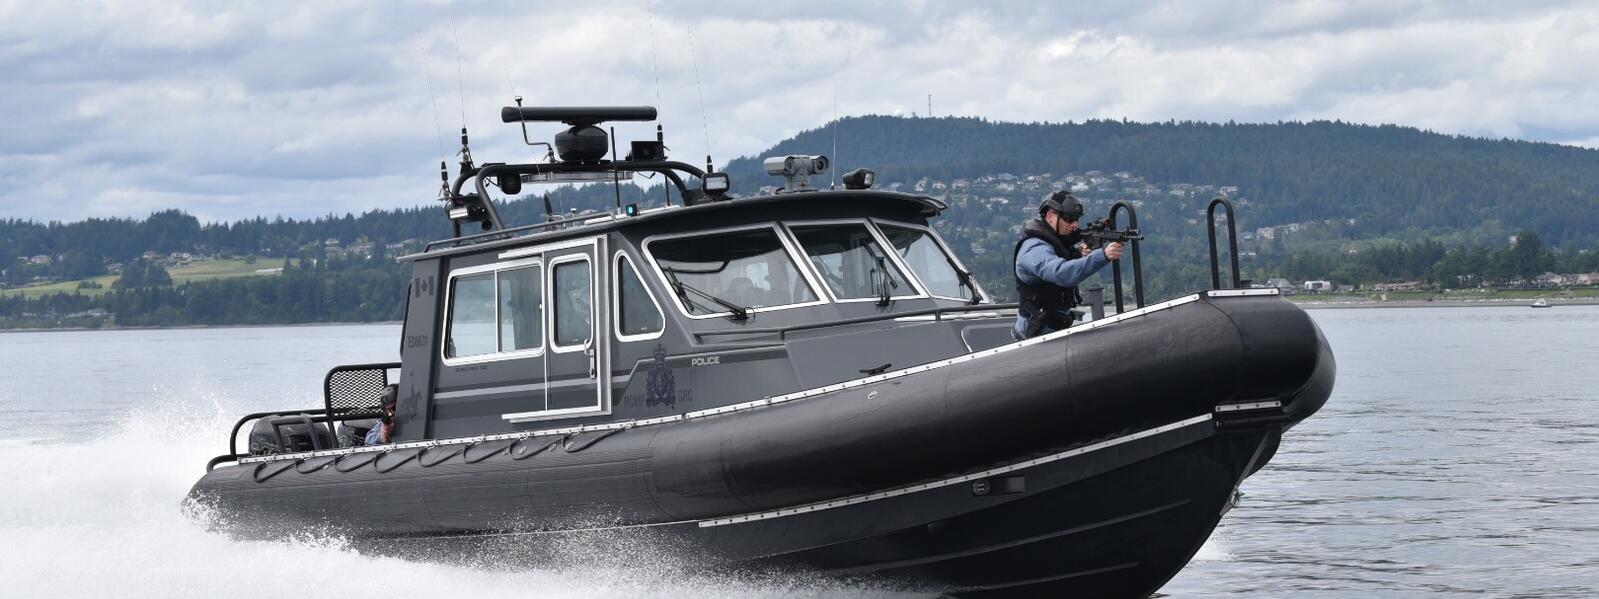 Police force boat with tactical officer and mounted surveillance camera.